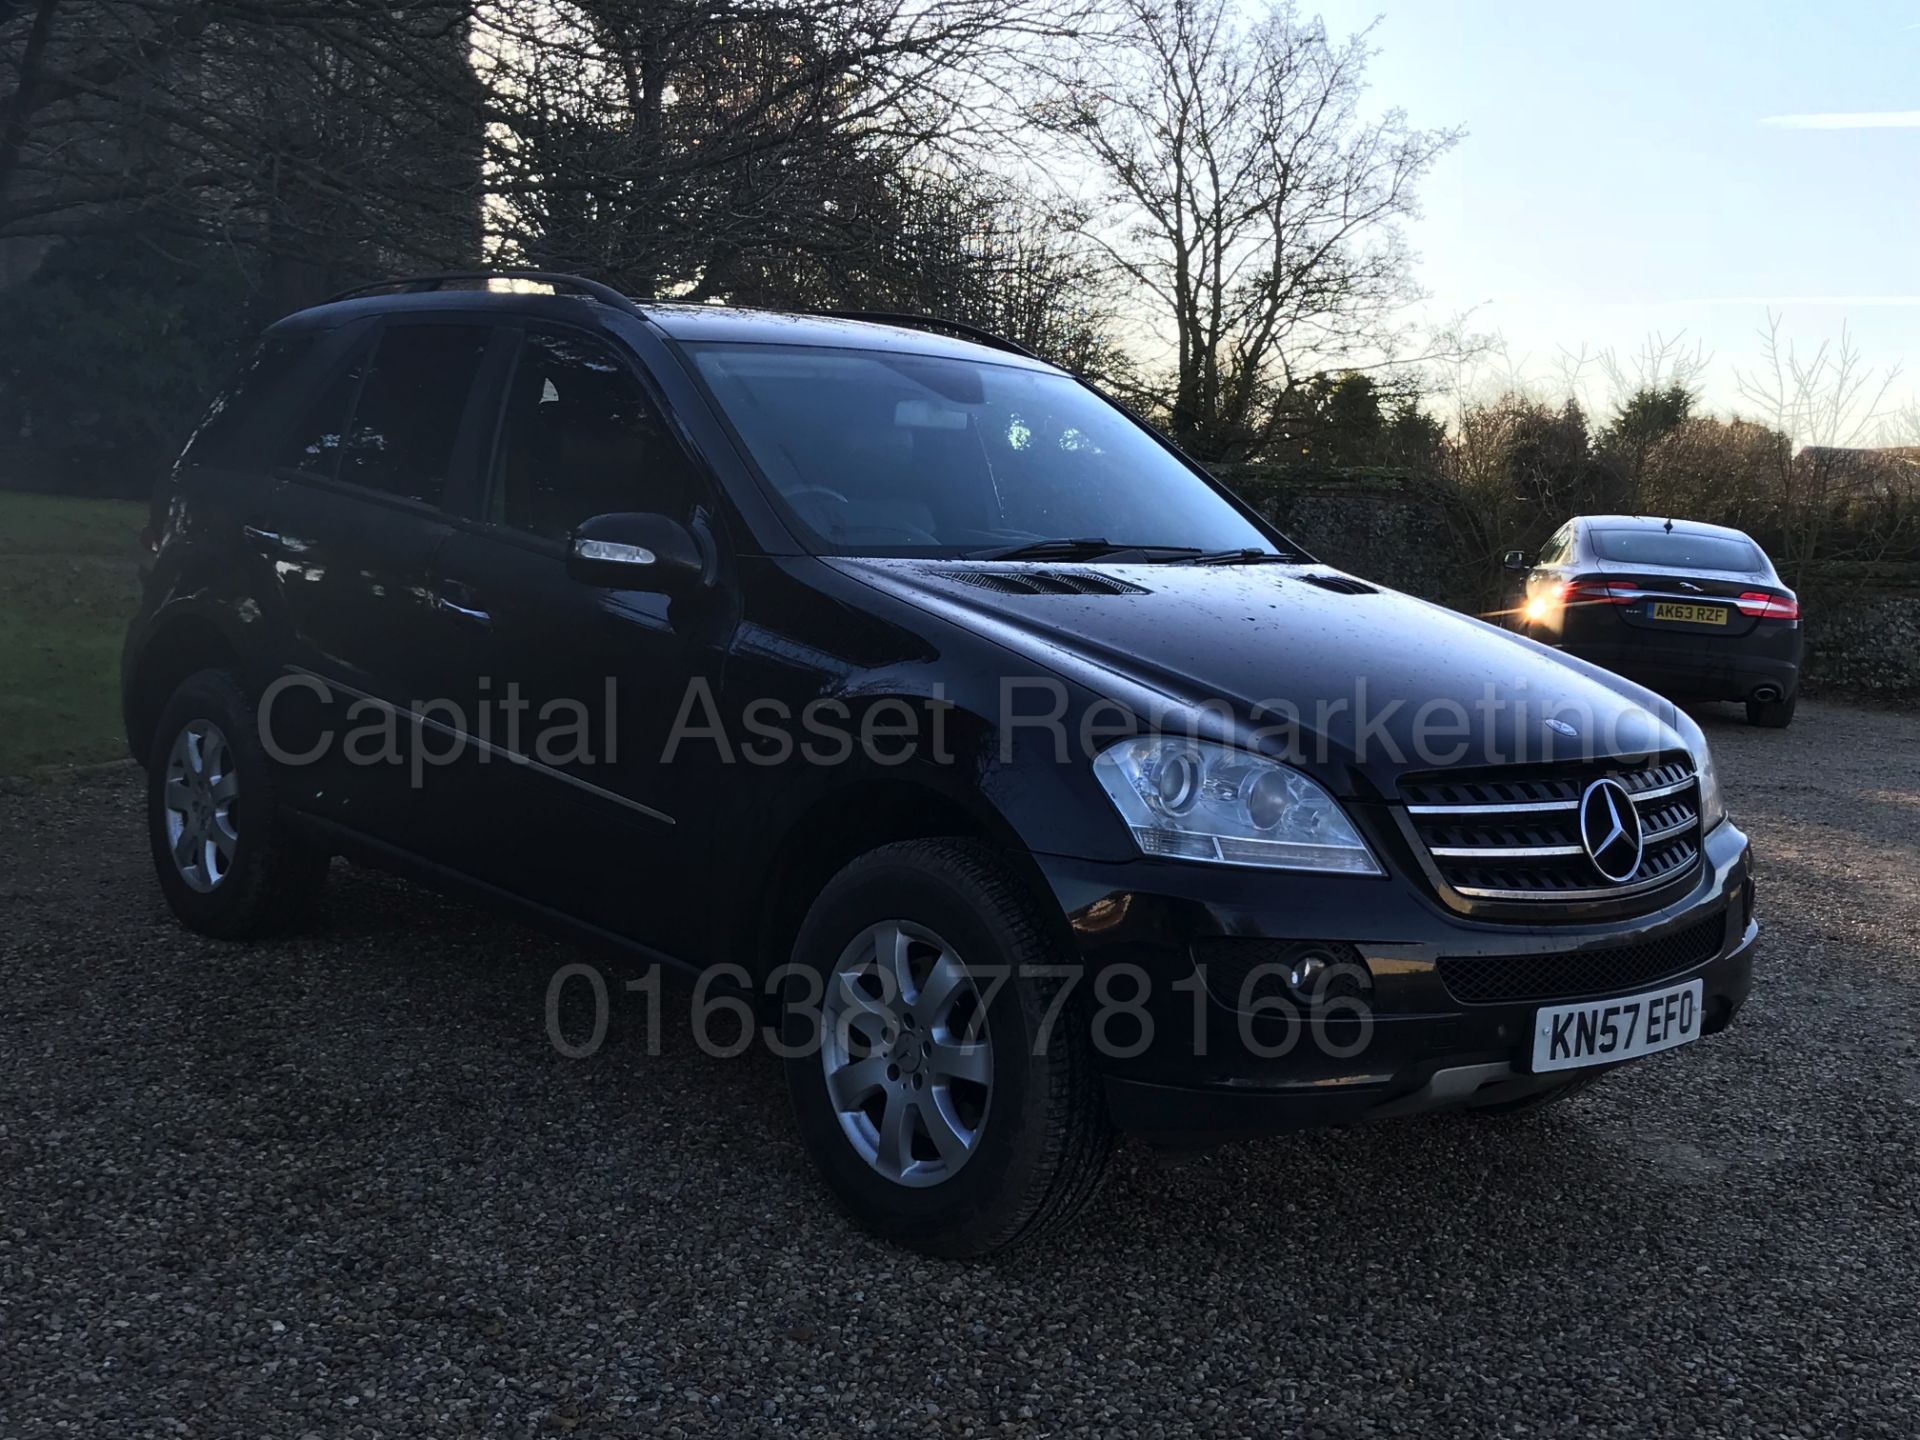 (On Sale) MERCEDES-BENZ ML 320 CDI 'SPECIAL EQUIPMENT' (2008 MODEL) '3.0 DIESEL - AUTO - LEATHER’